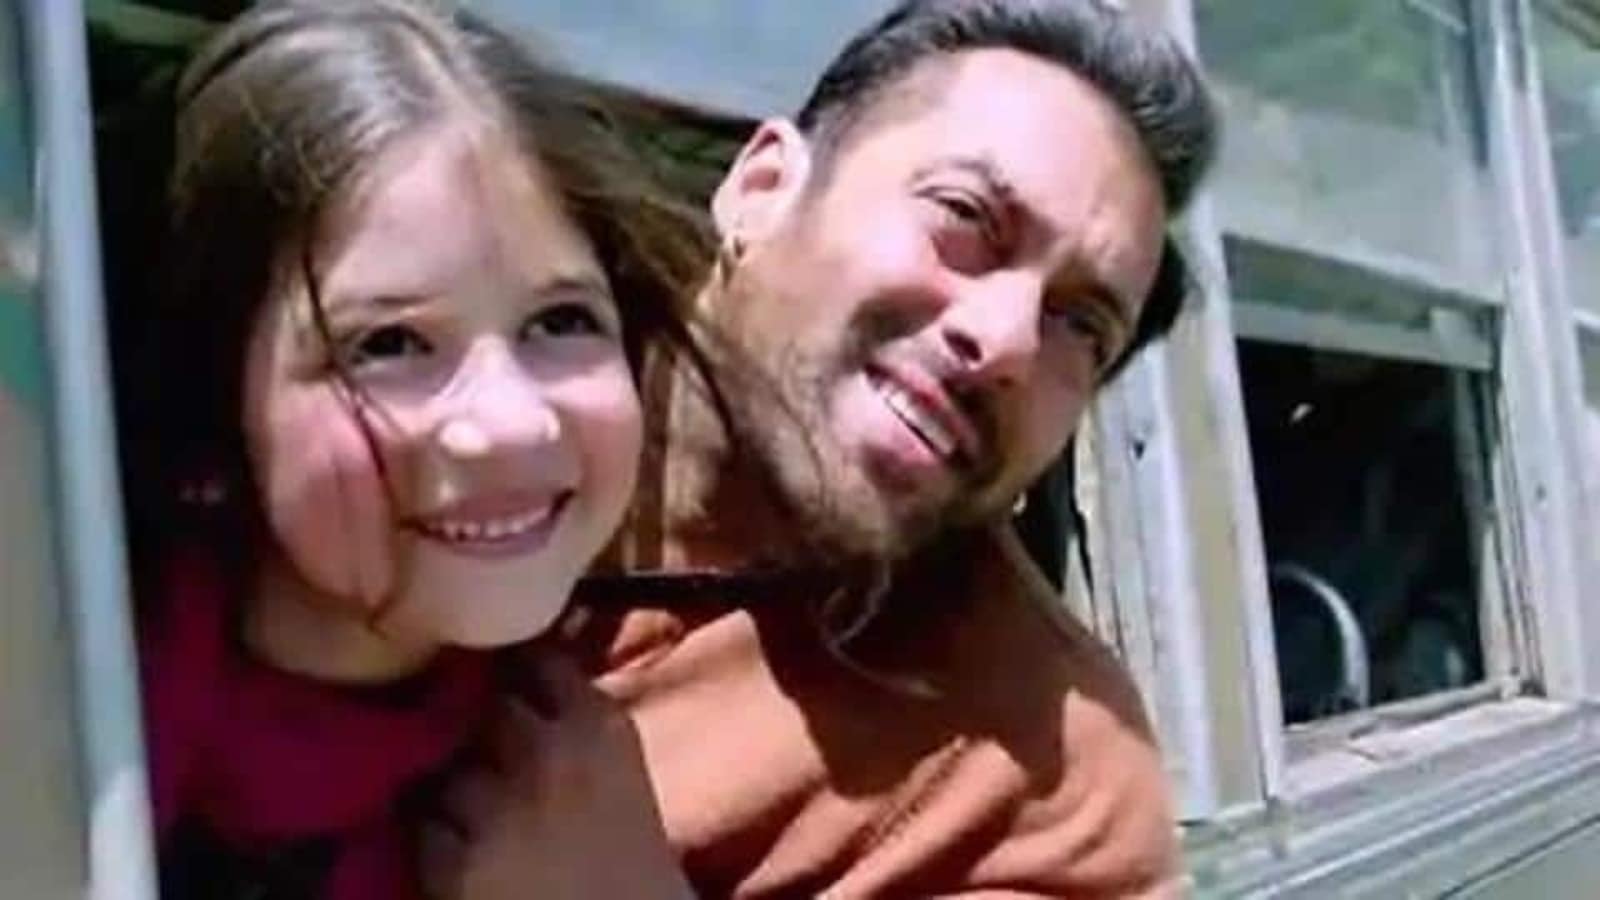 Harshaali Malhotra is waiting for ‘uncle’ Salman Khan’s call for Bajrangi Bhaijaan’s sequel: ‘I hope I have a role’